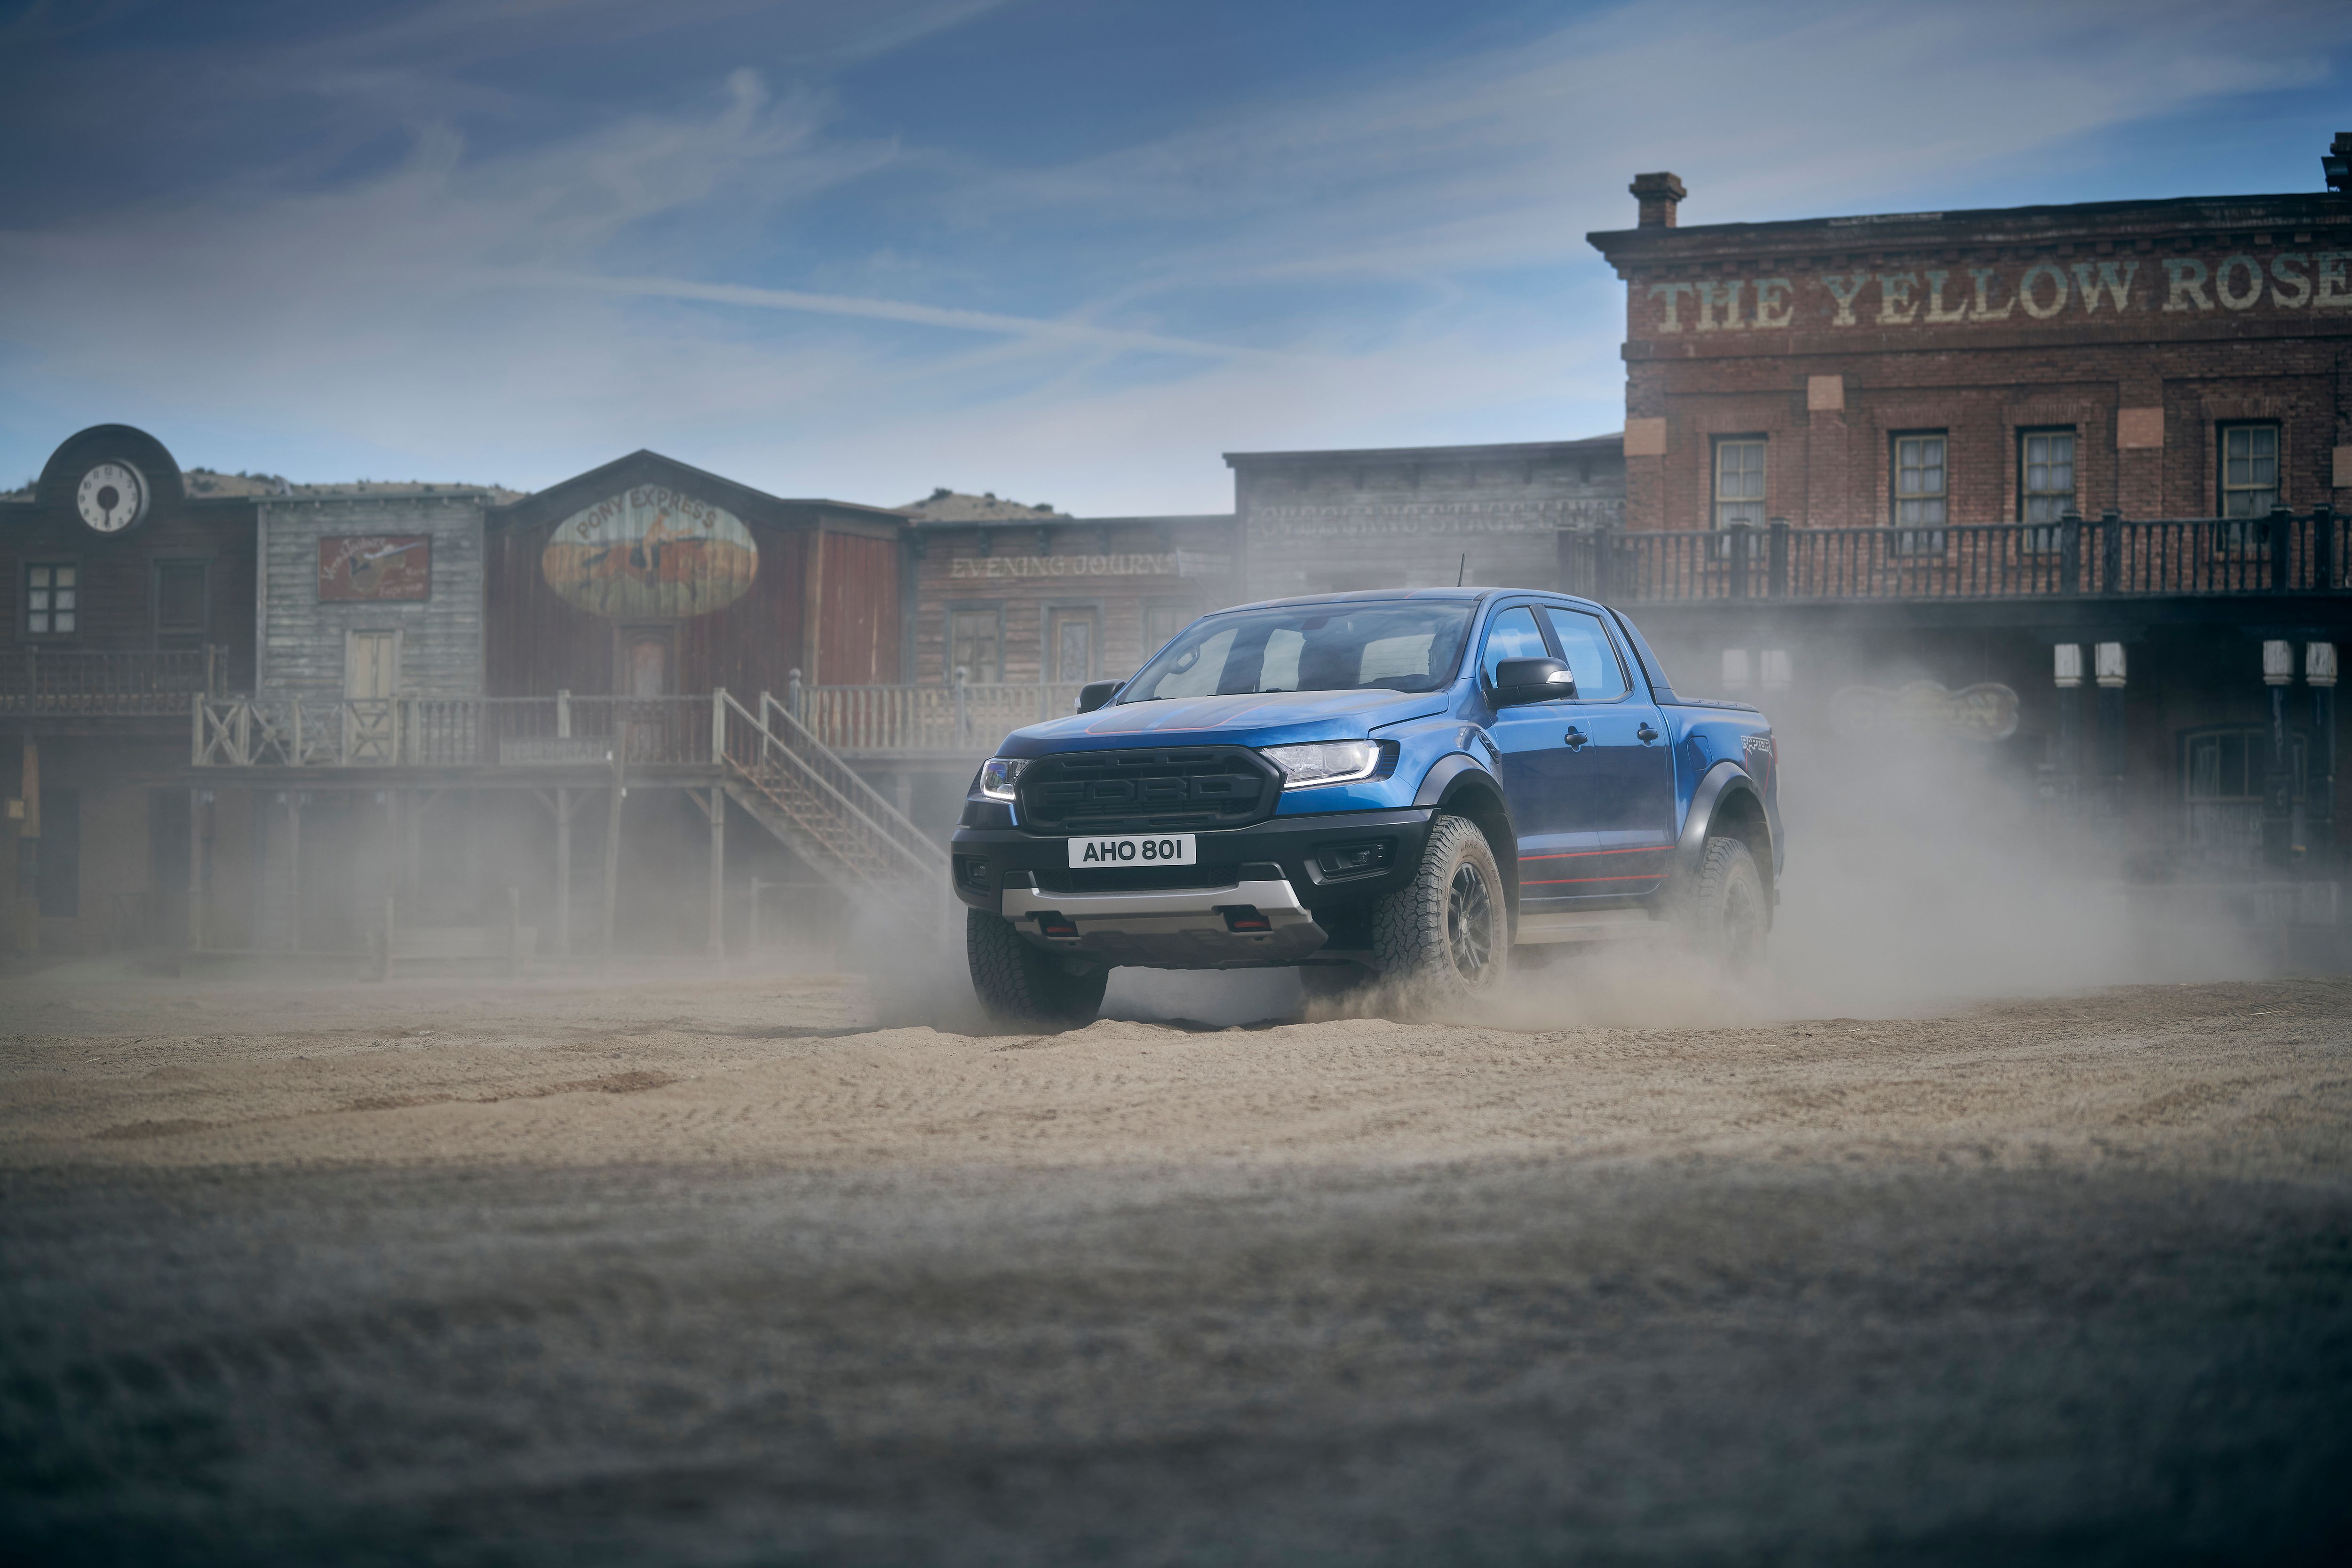 2021 Ford Ranger Raptor Special Edition - Is It Really That Bad Ass?